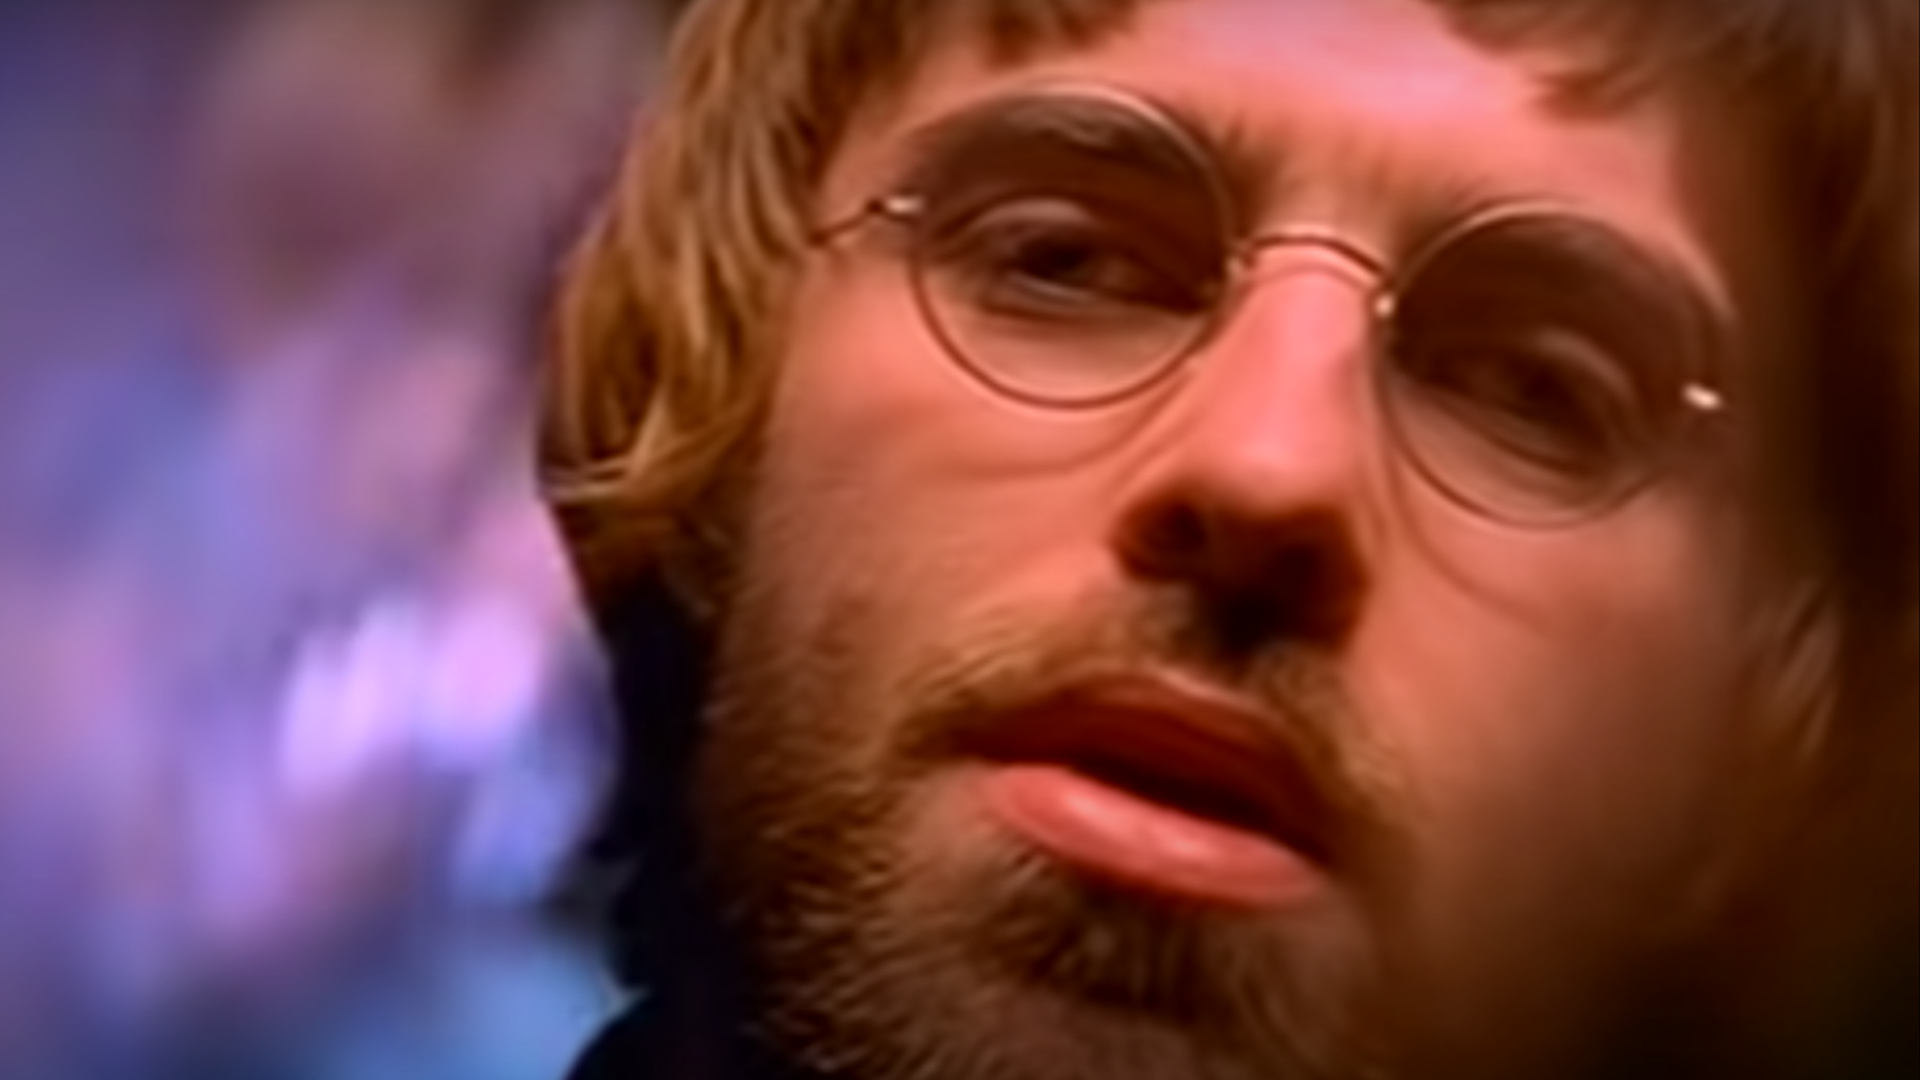 Liam Gallagher in a beard and round glasses